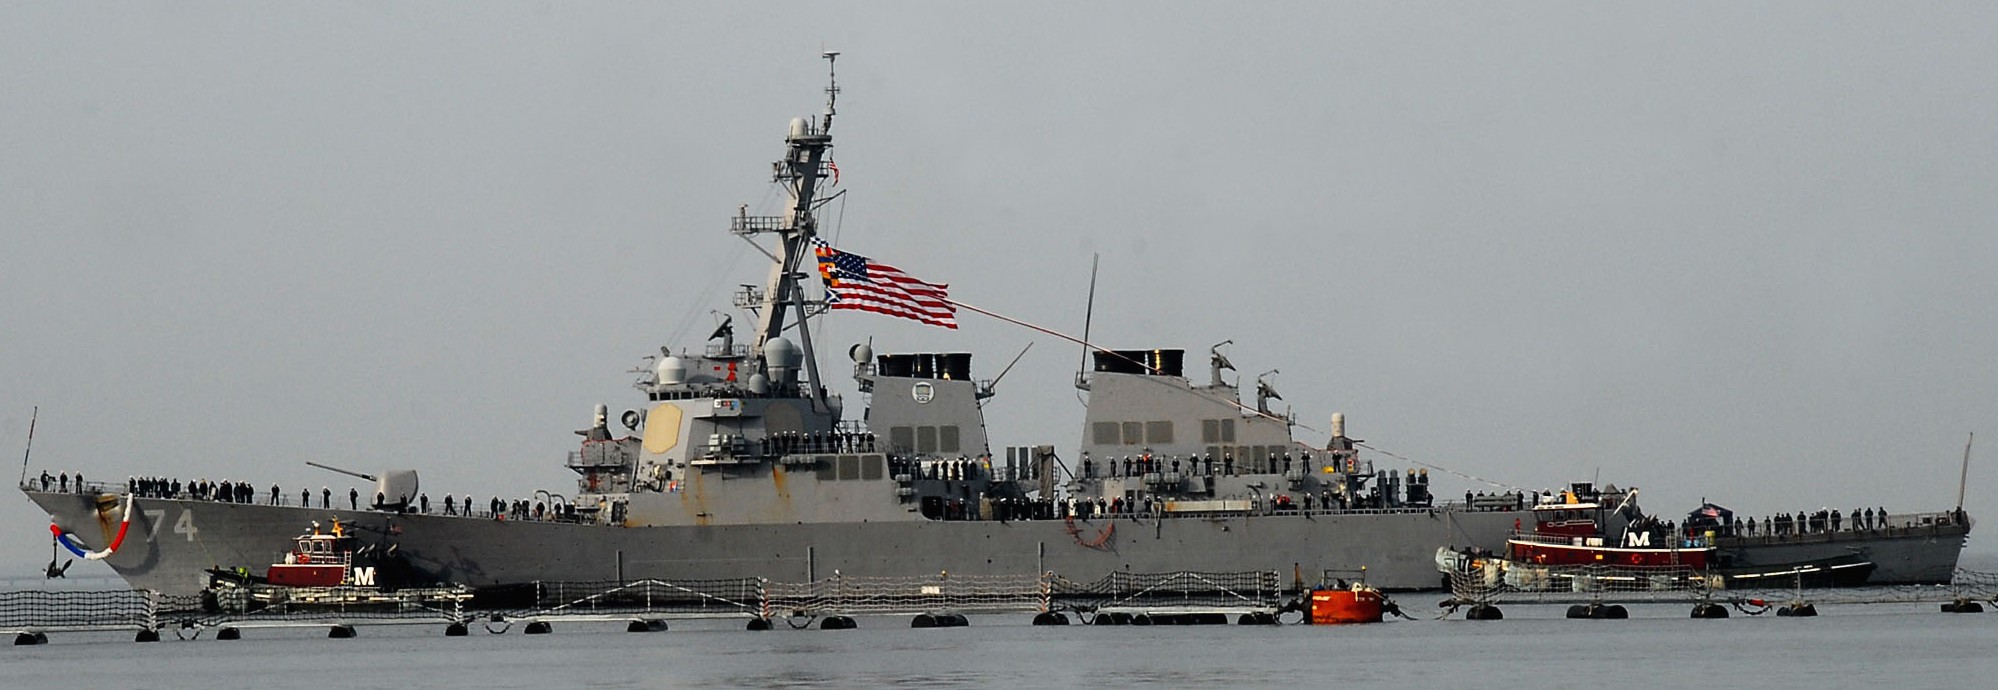 ddg-74 uss mcfaul guided missile destroyer arleigh burke class aegis bmd 29